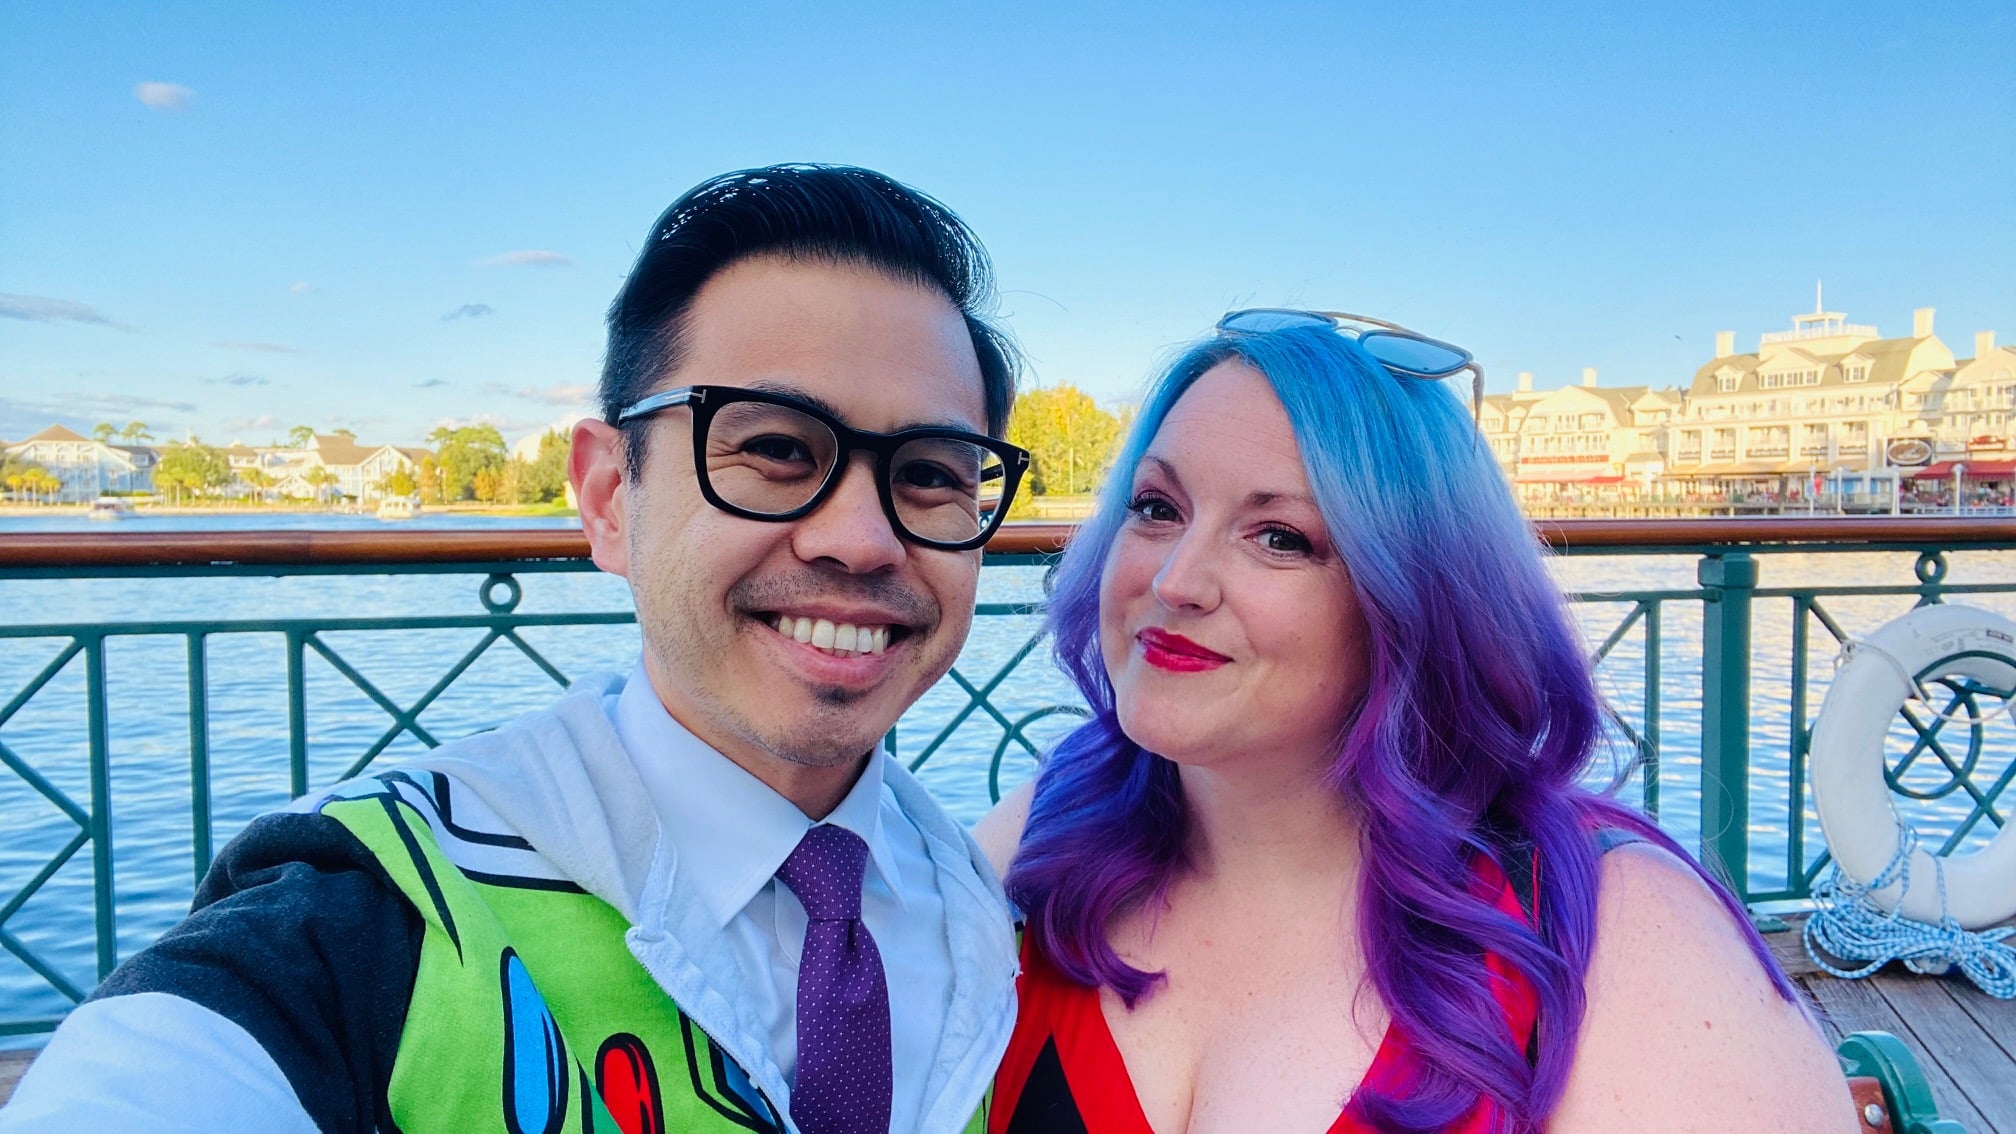 woman with blue and purple hair stands next to man wearing black framed classes smiling